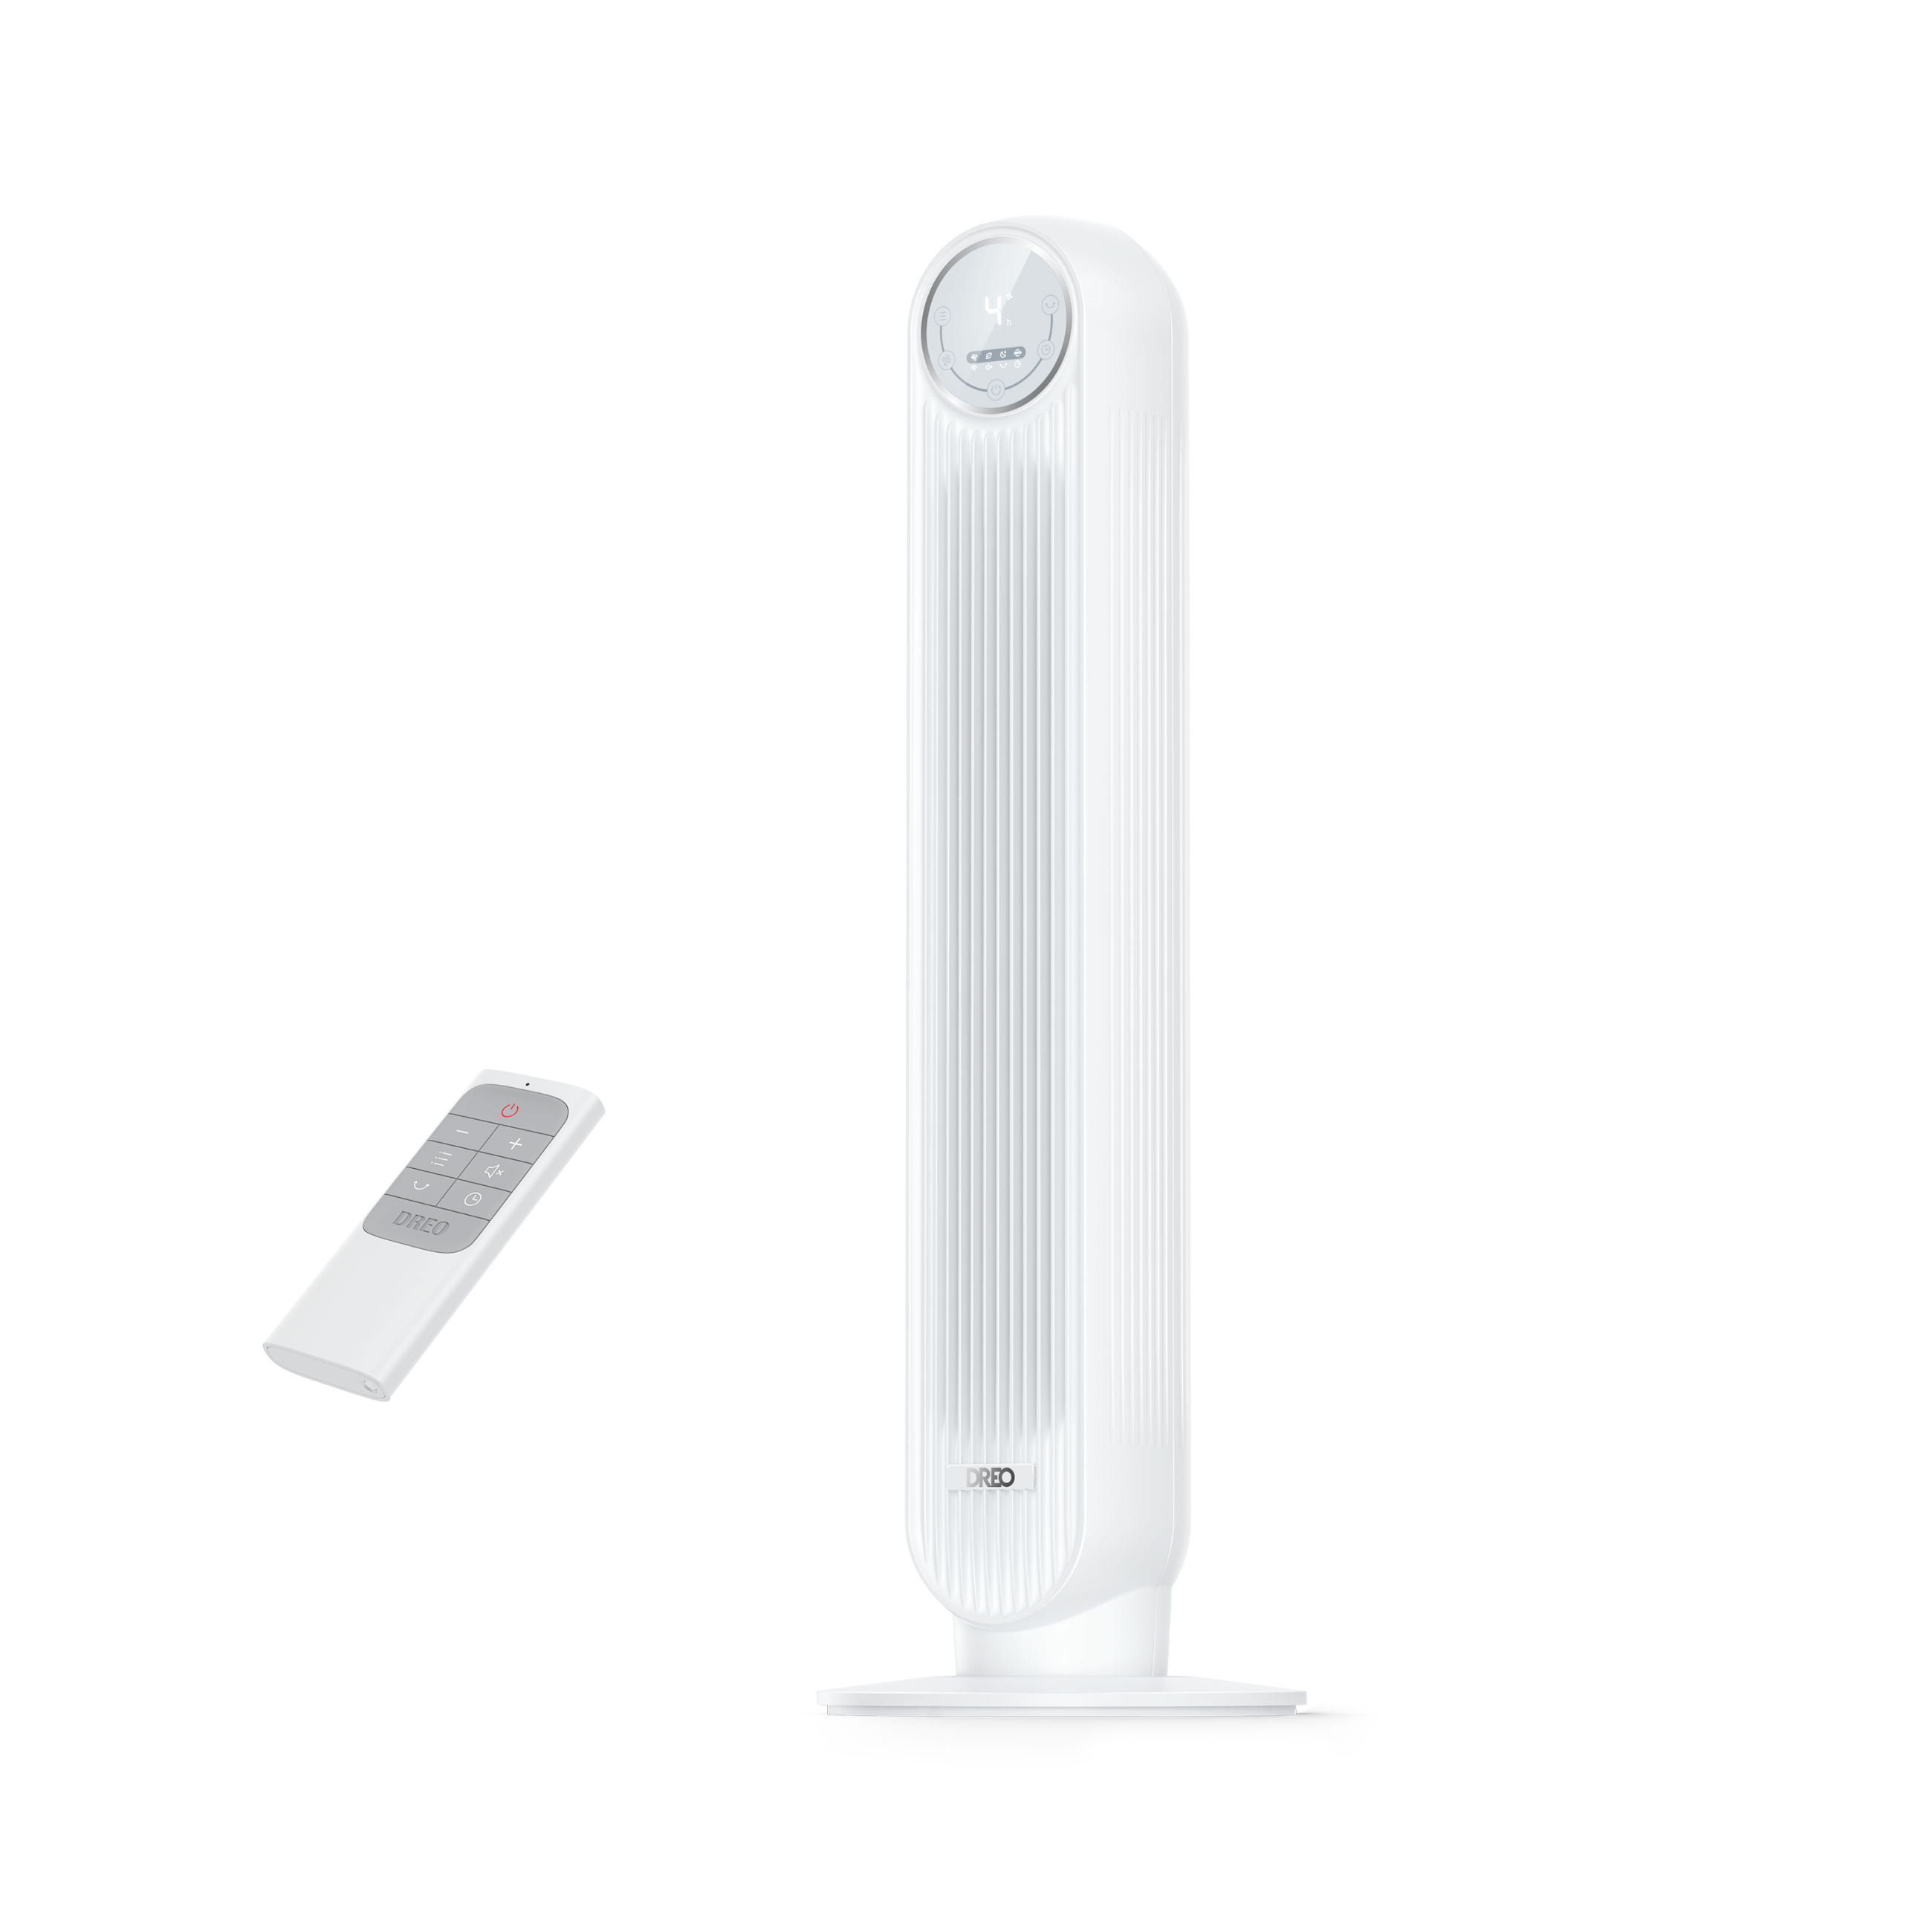 Dreo Tower Fan, Fans, Quiet Cooling Fan, 90°oscillating fan with 12 Modes, Tower Fan with Remote, Large LED Display, Touch Control, Timer, Bladeless Standing Fans for home, Floor fan, DR-HTF007 White